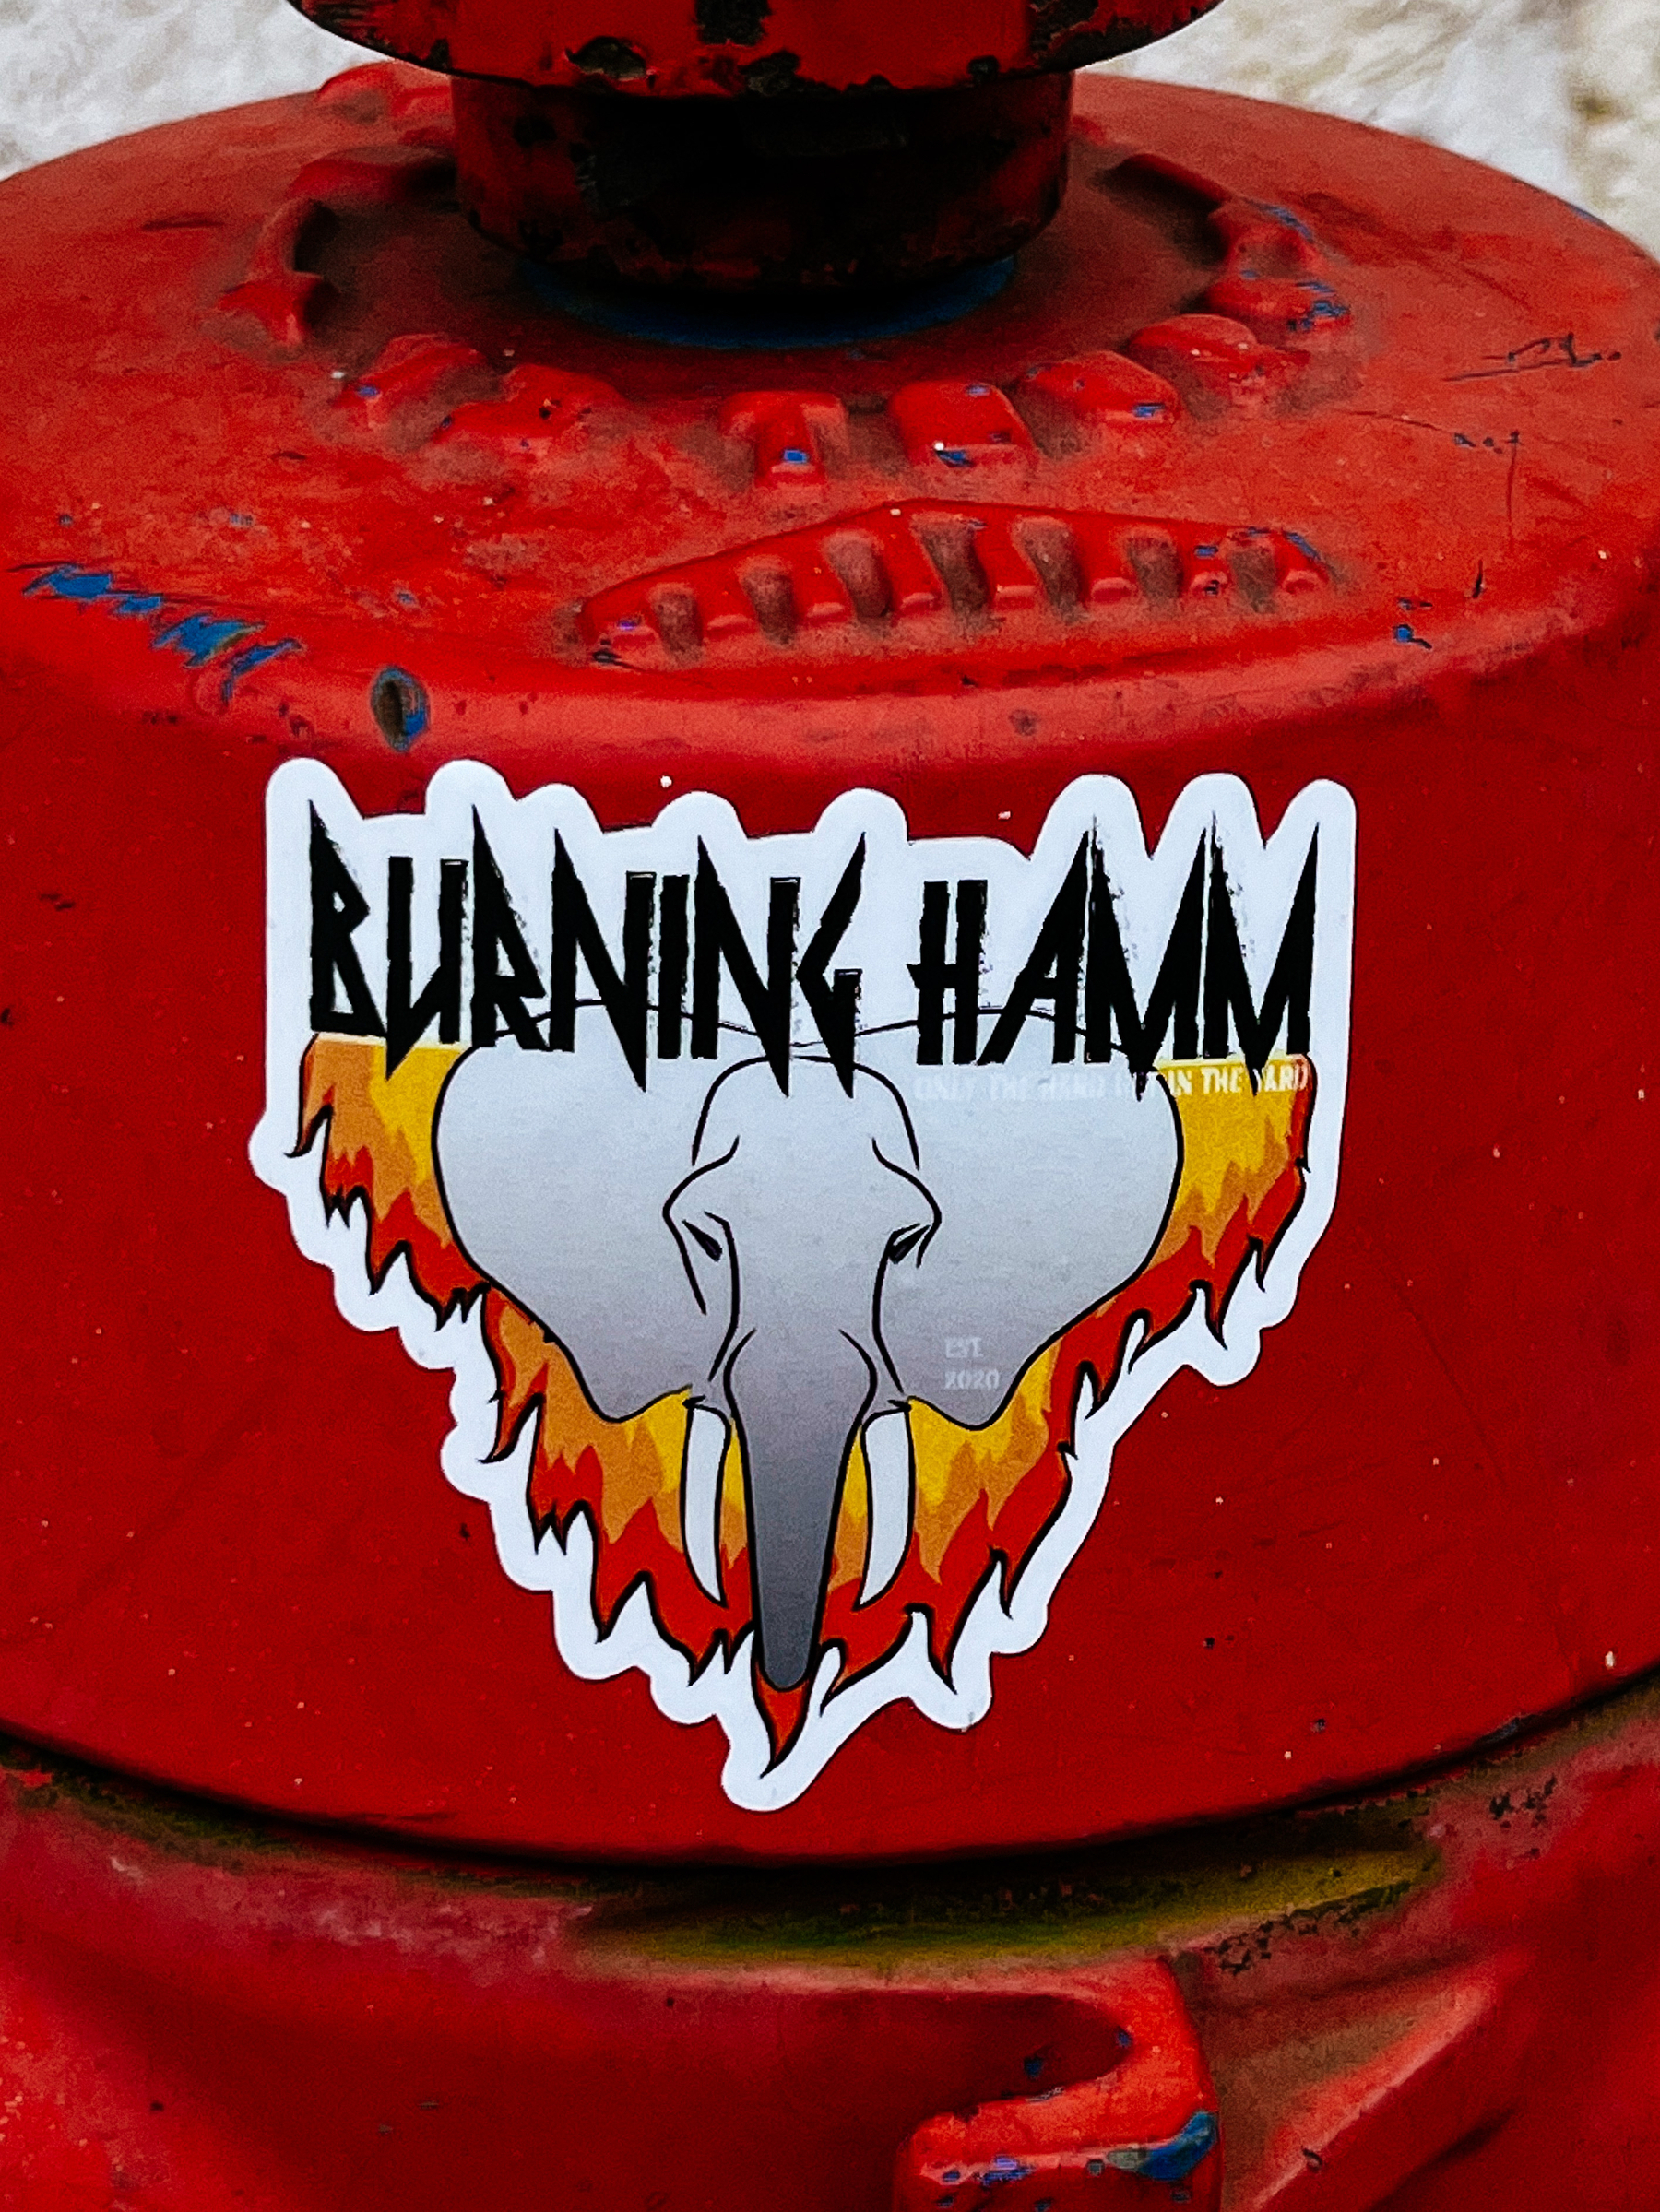 Sticker of an elephant’s head with flames around it, and the words “Burning Hamm”. 